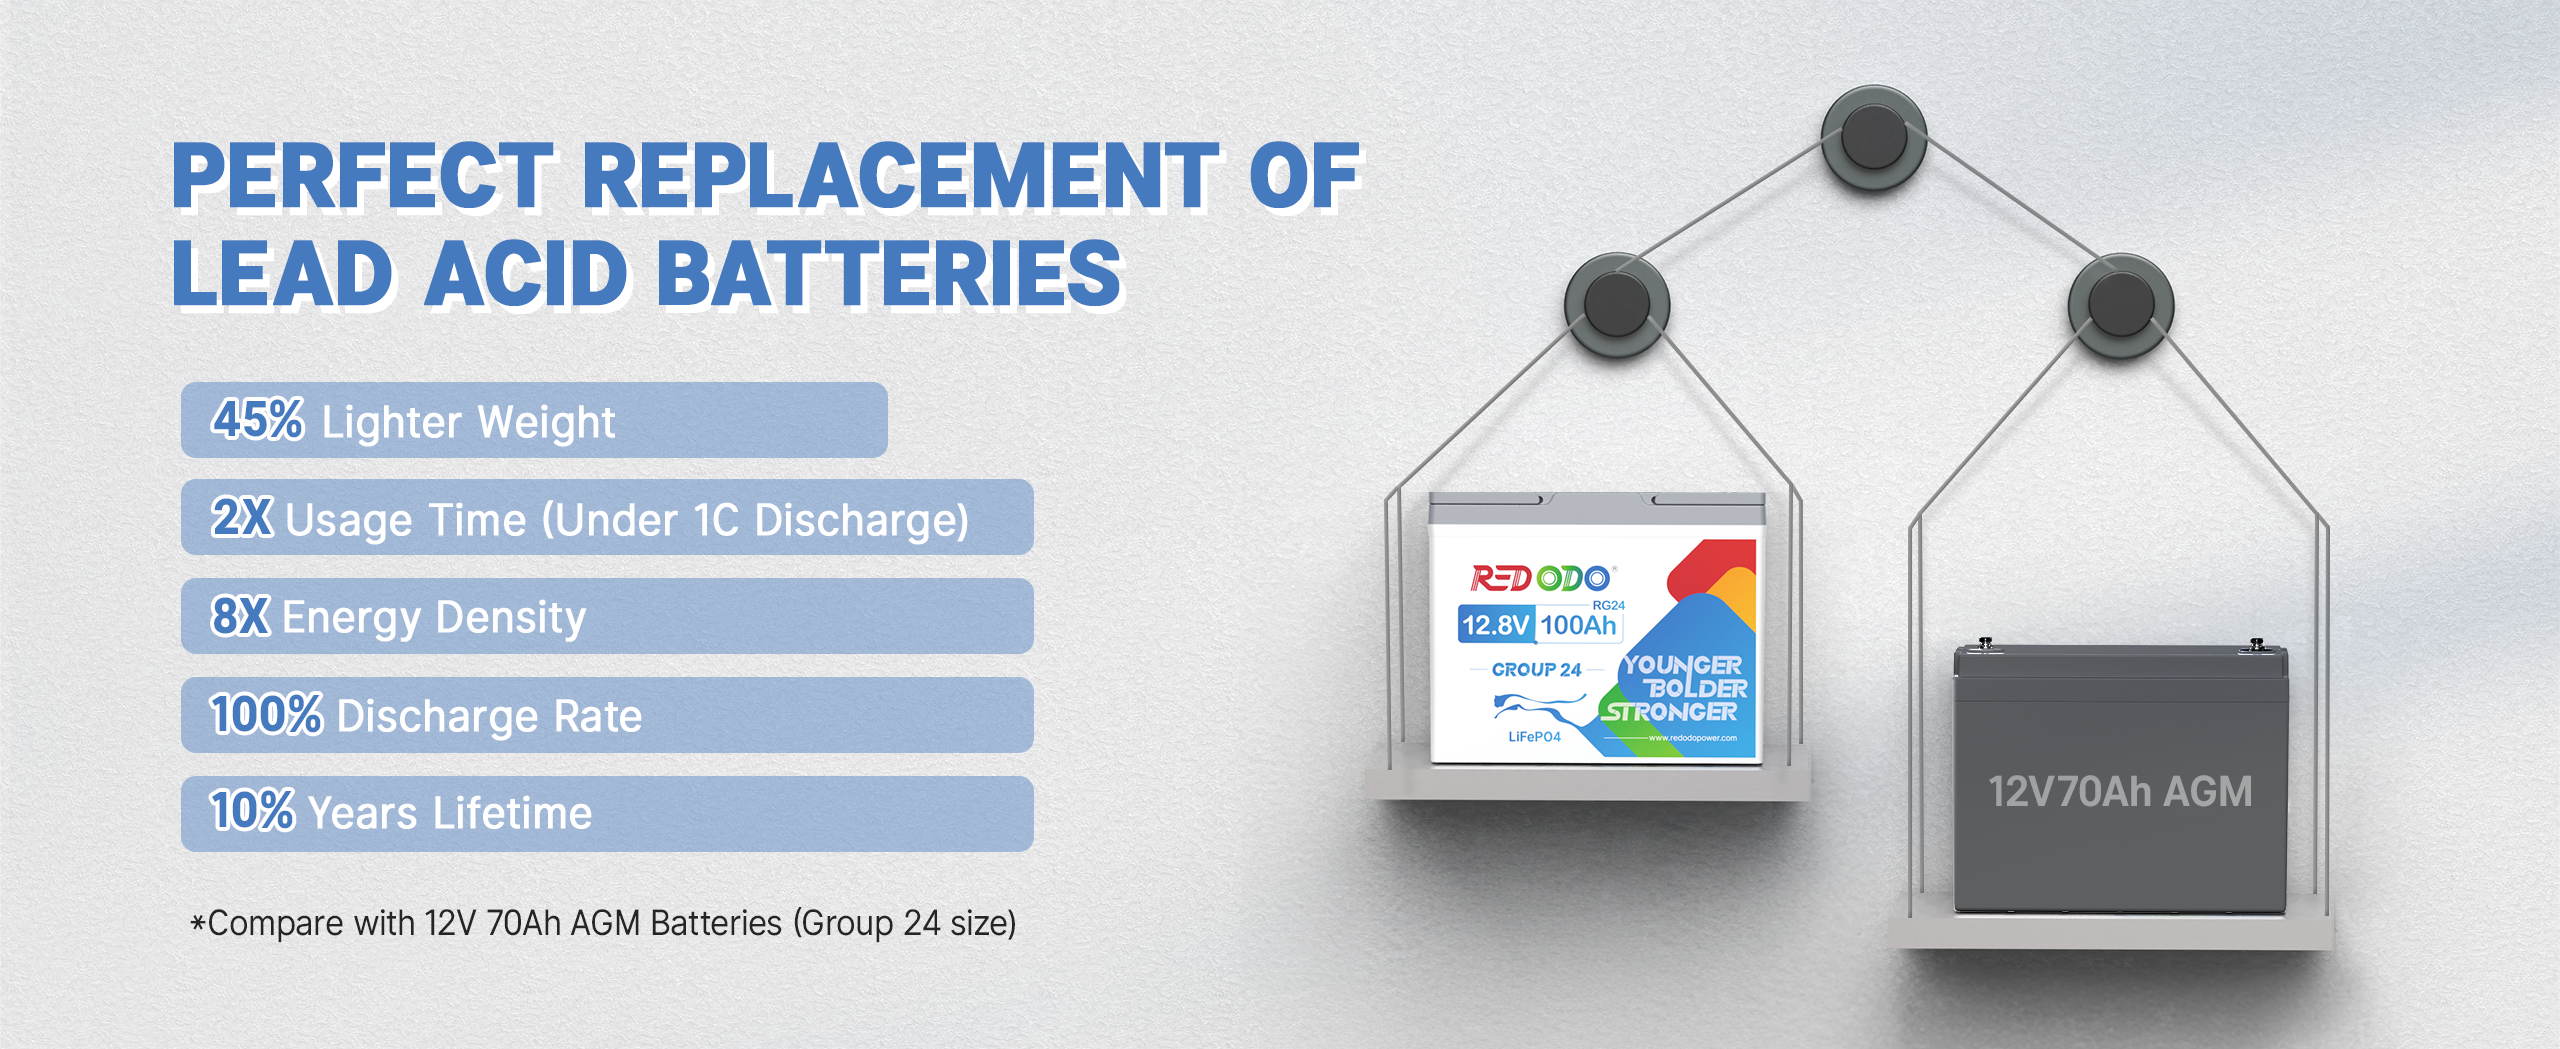 Redodo 12V 100Ah group 24 battery dimensions, much lighter and smaller.jpg__PID:12dcc73d-dcd2-4381-a2b0-8f2a5108c54d